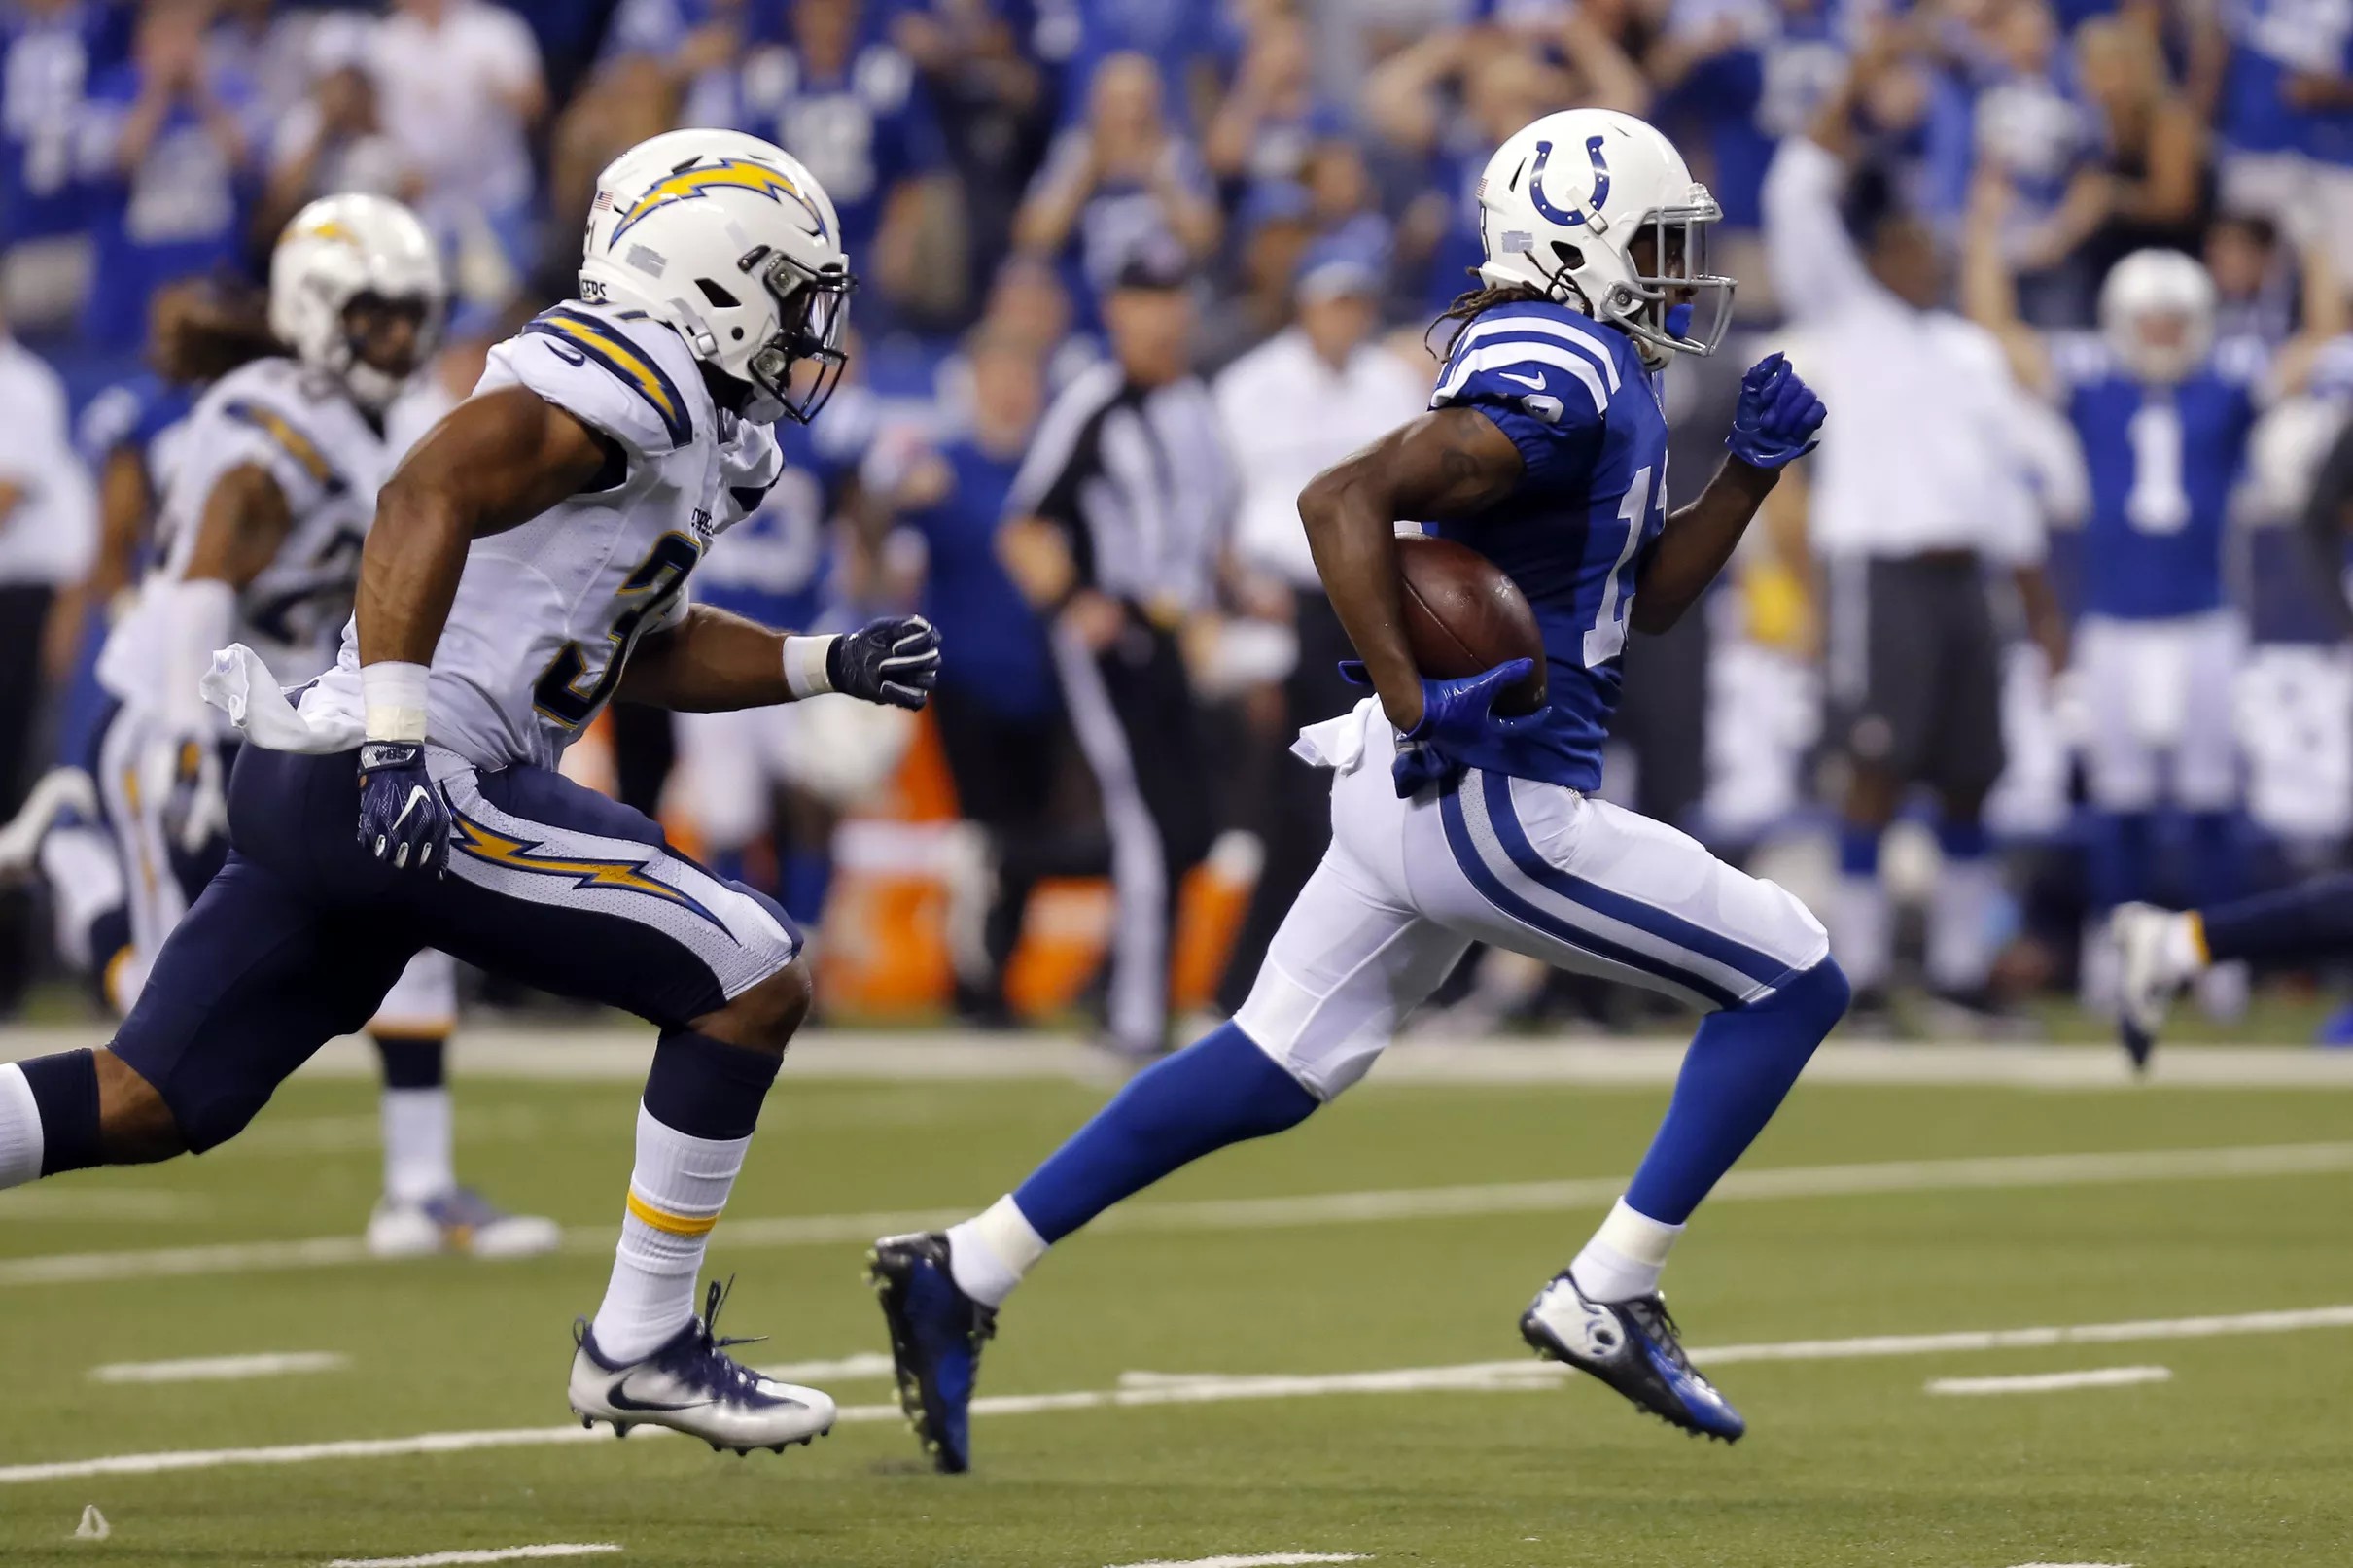 Colts vs Chargers Week One Game Time, TV Schedule, Radio Info, and More